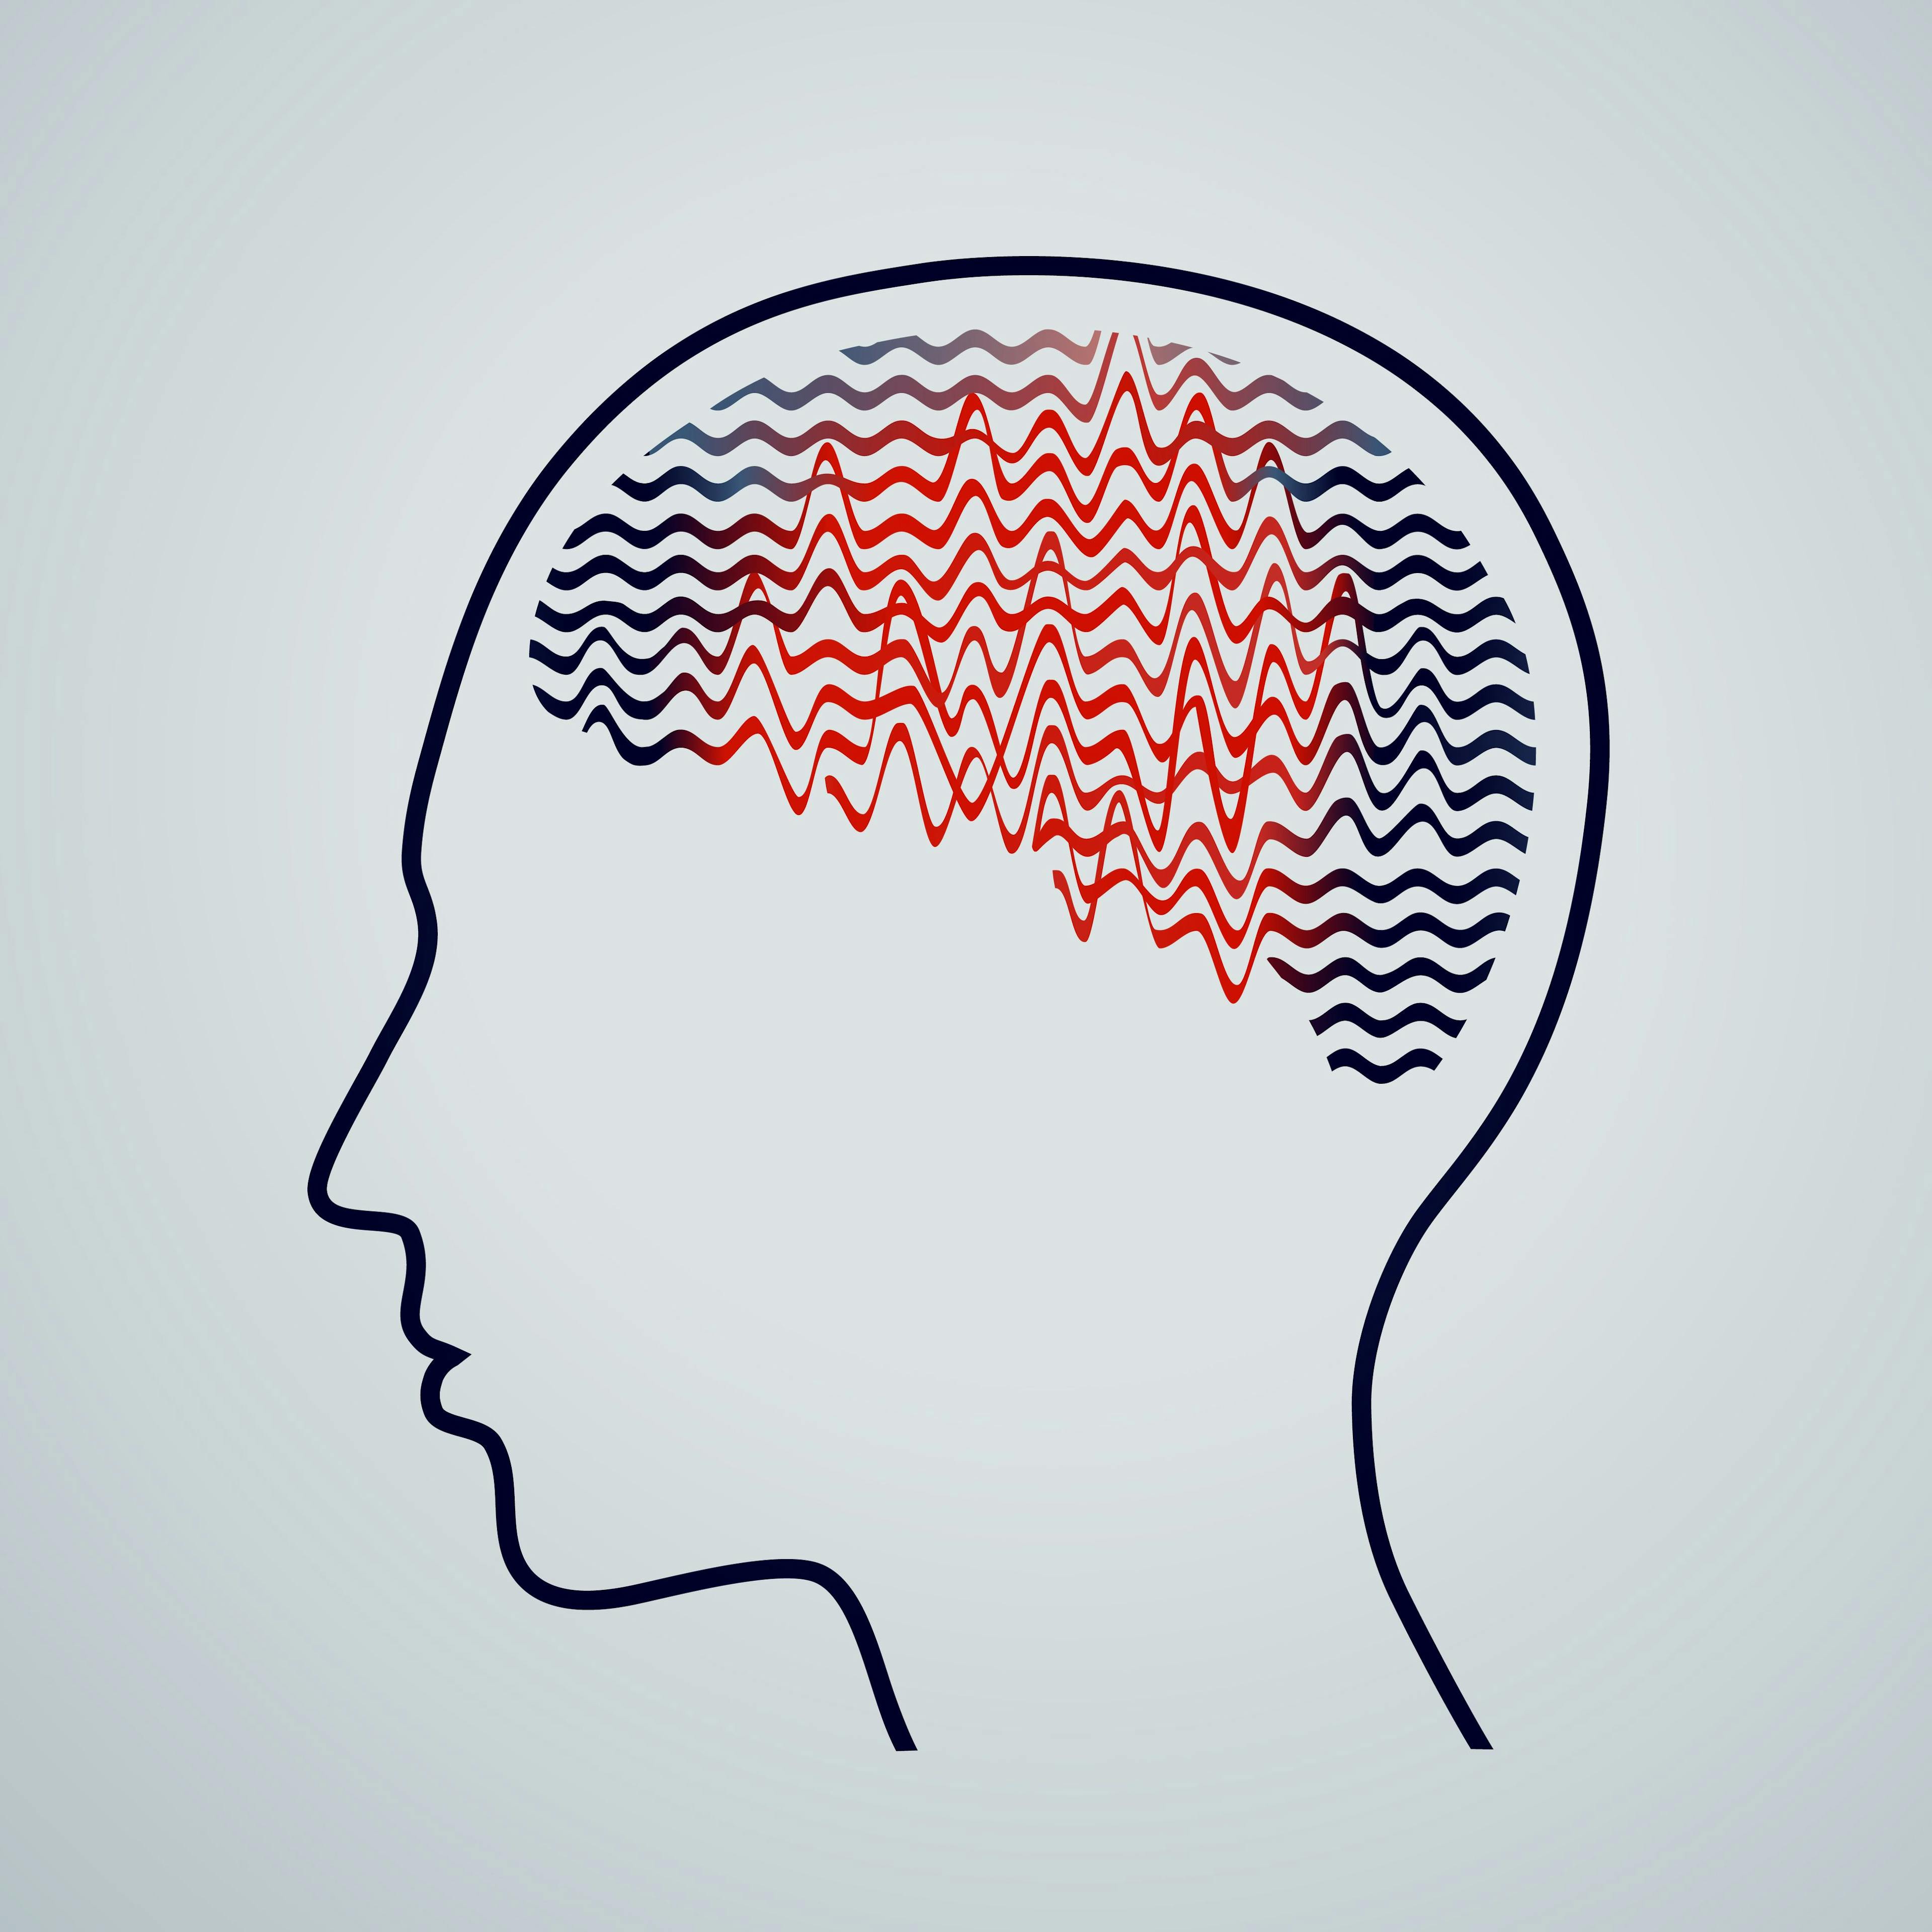 Expert: Effectively Treating Functional Seizures May Help to Treat Other Comorbid Psychiatric Conditions